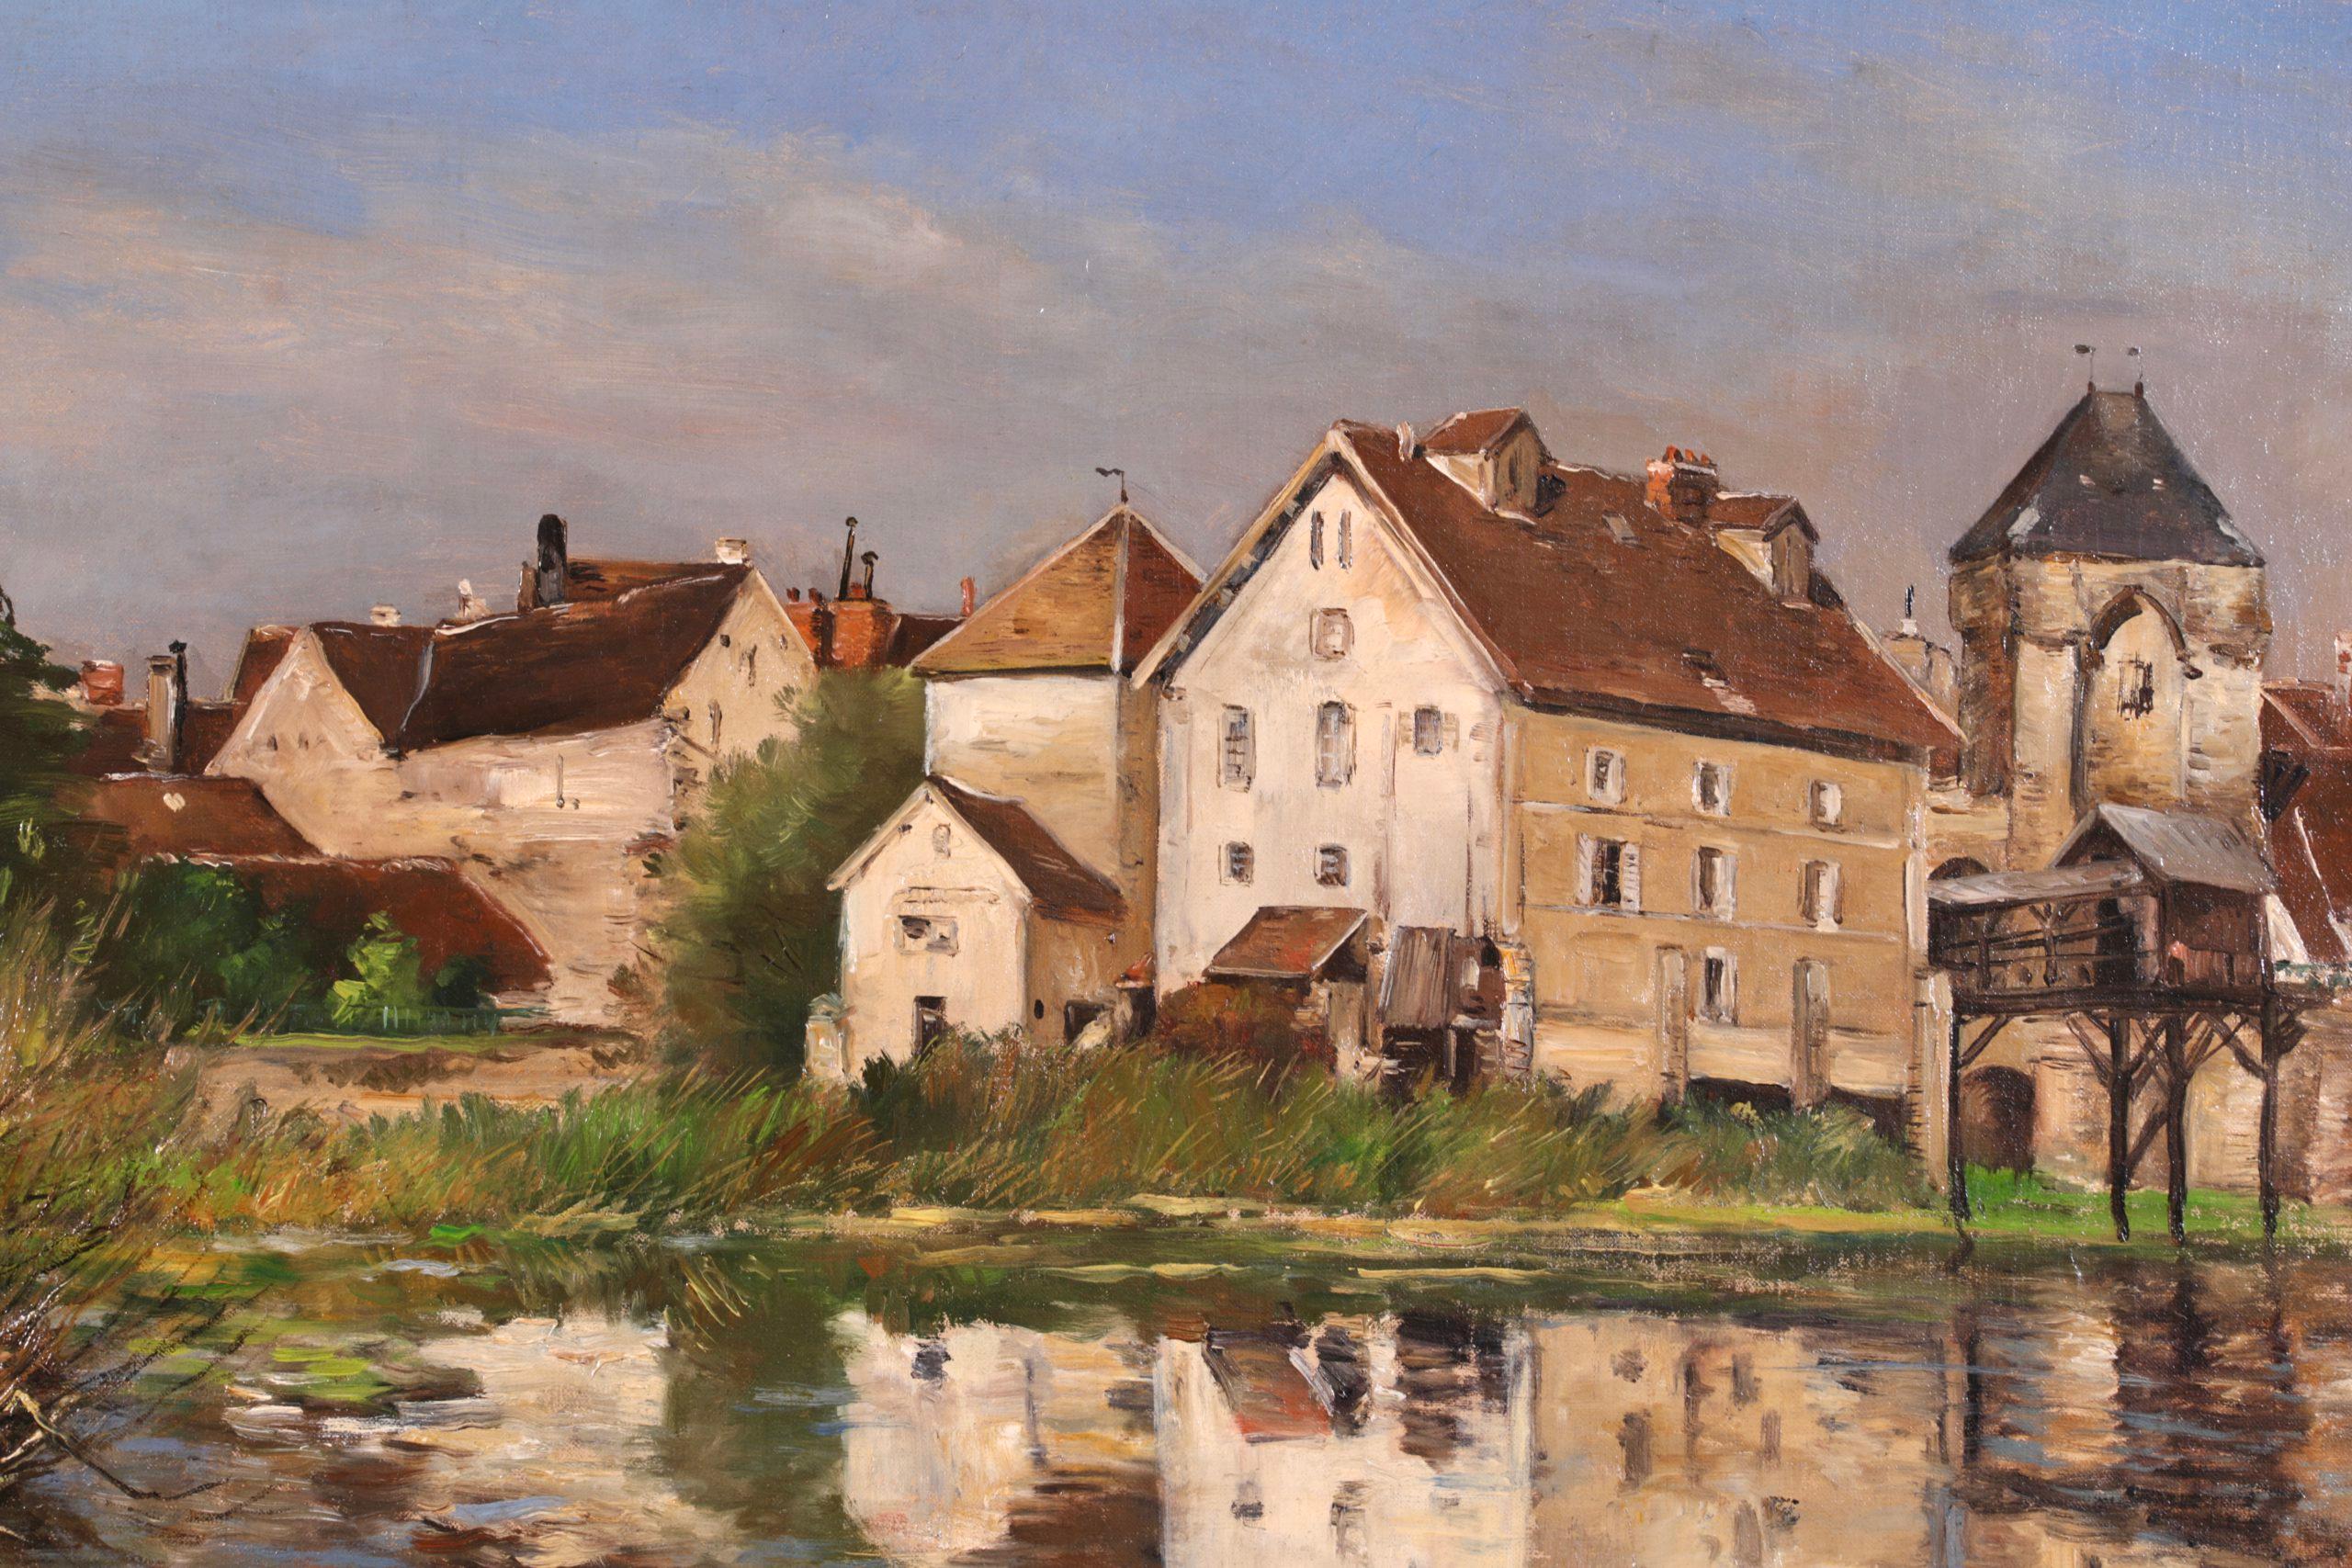 Signed oil on canvas landscape circa 1890 by French impressionist painter Jean Baptiste Antoine Guillemet. The work depicts a view of Moret-sur-Loing in North Eastern France from the bank of the River Loing. The town's buildings are reflecting in